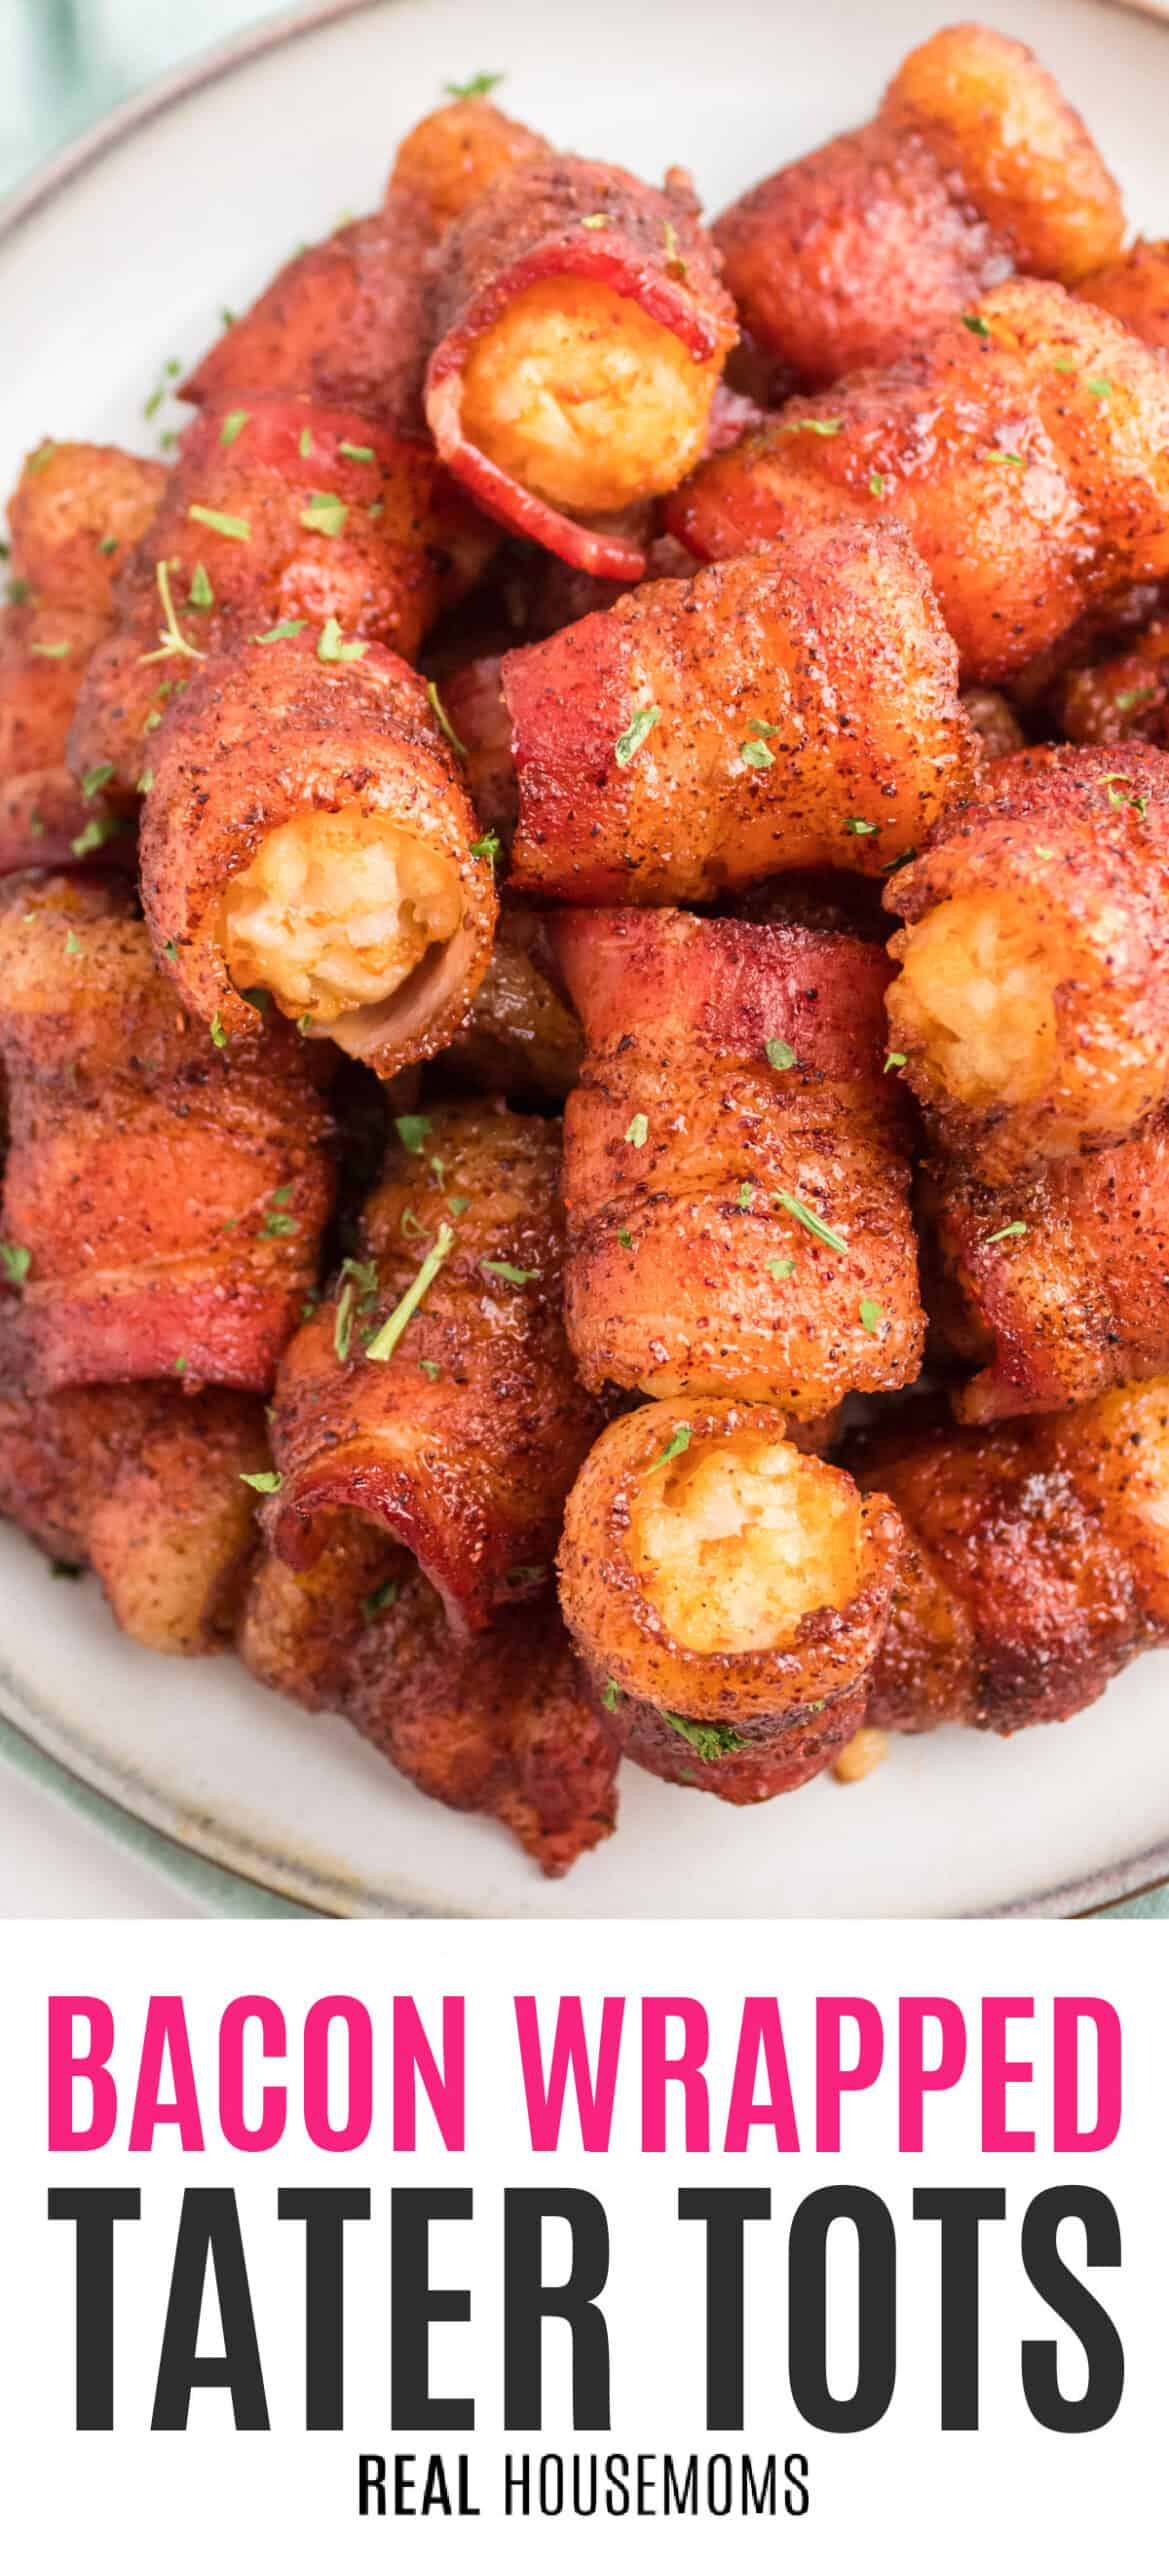 https://realhousemoms.com/wp-content/uploads/Sweet-Bacon-Wrapped-Tater-Tots-HERO-scaled.jpg